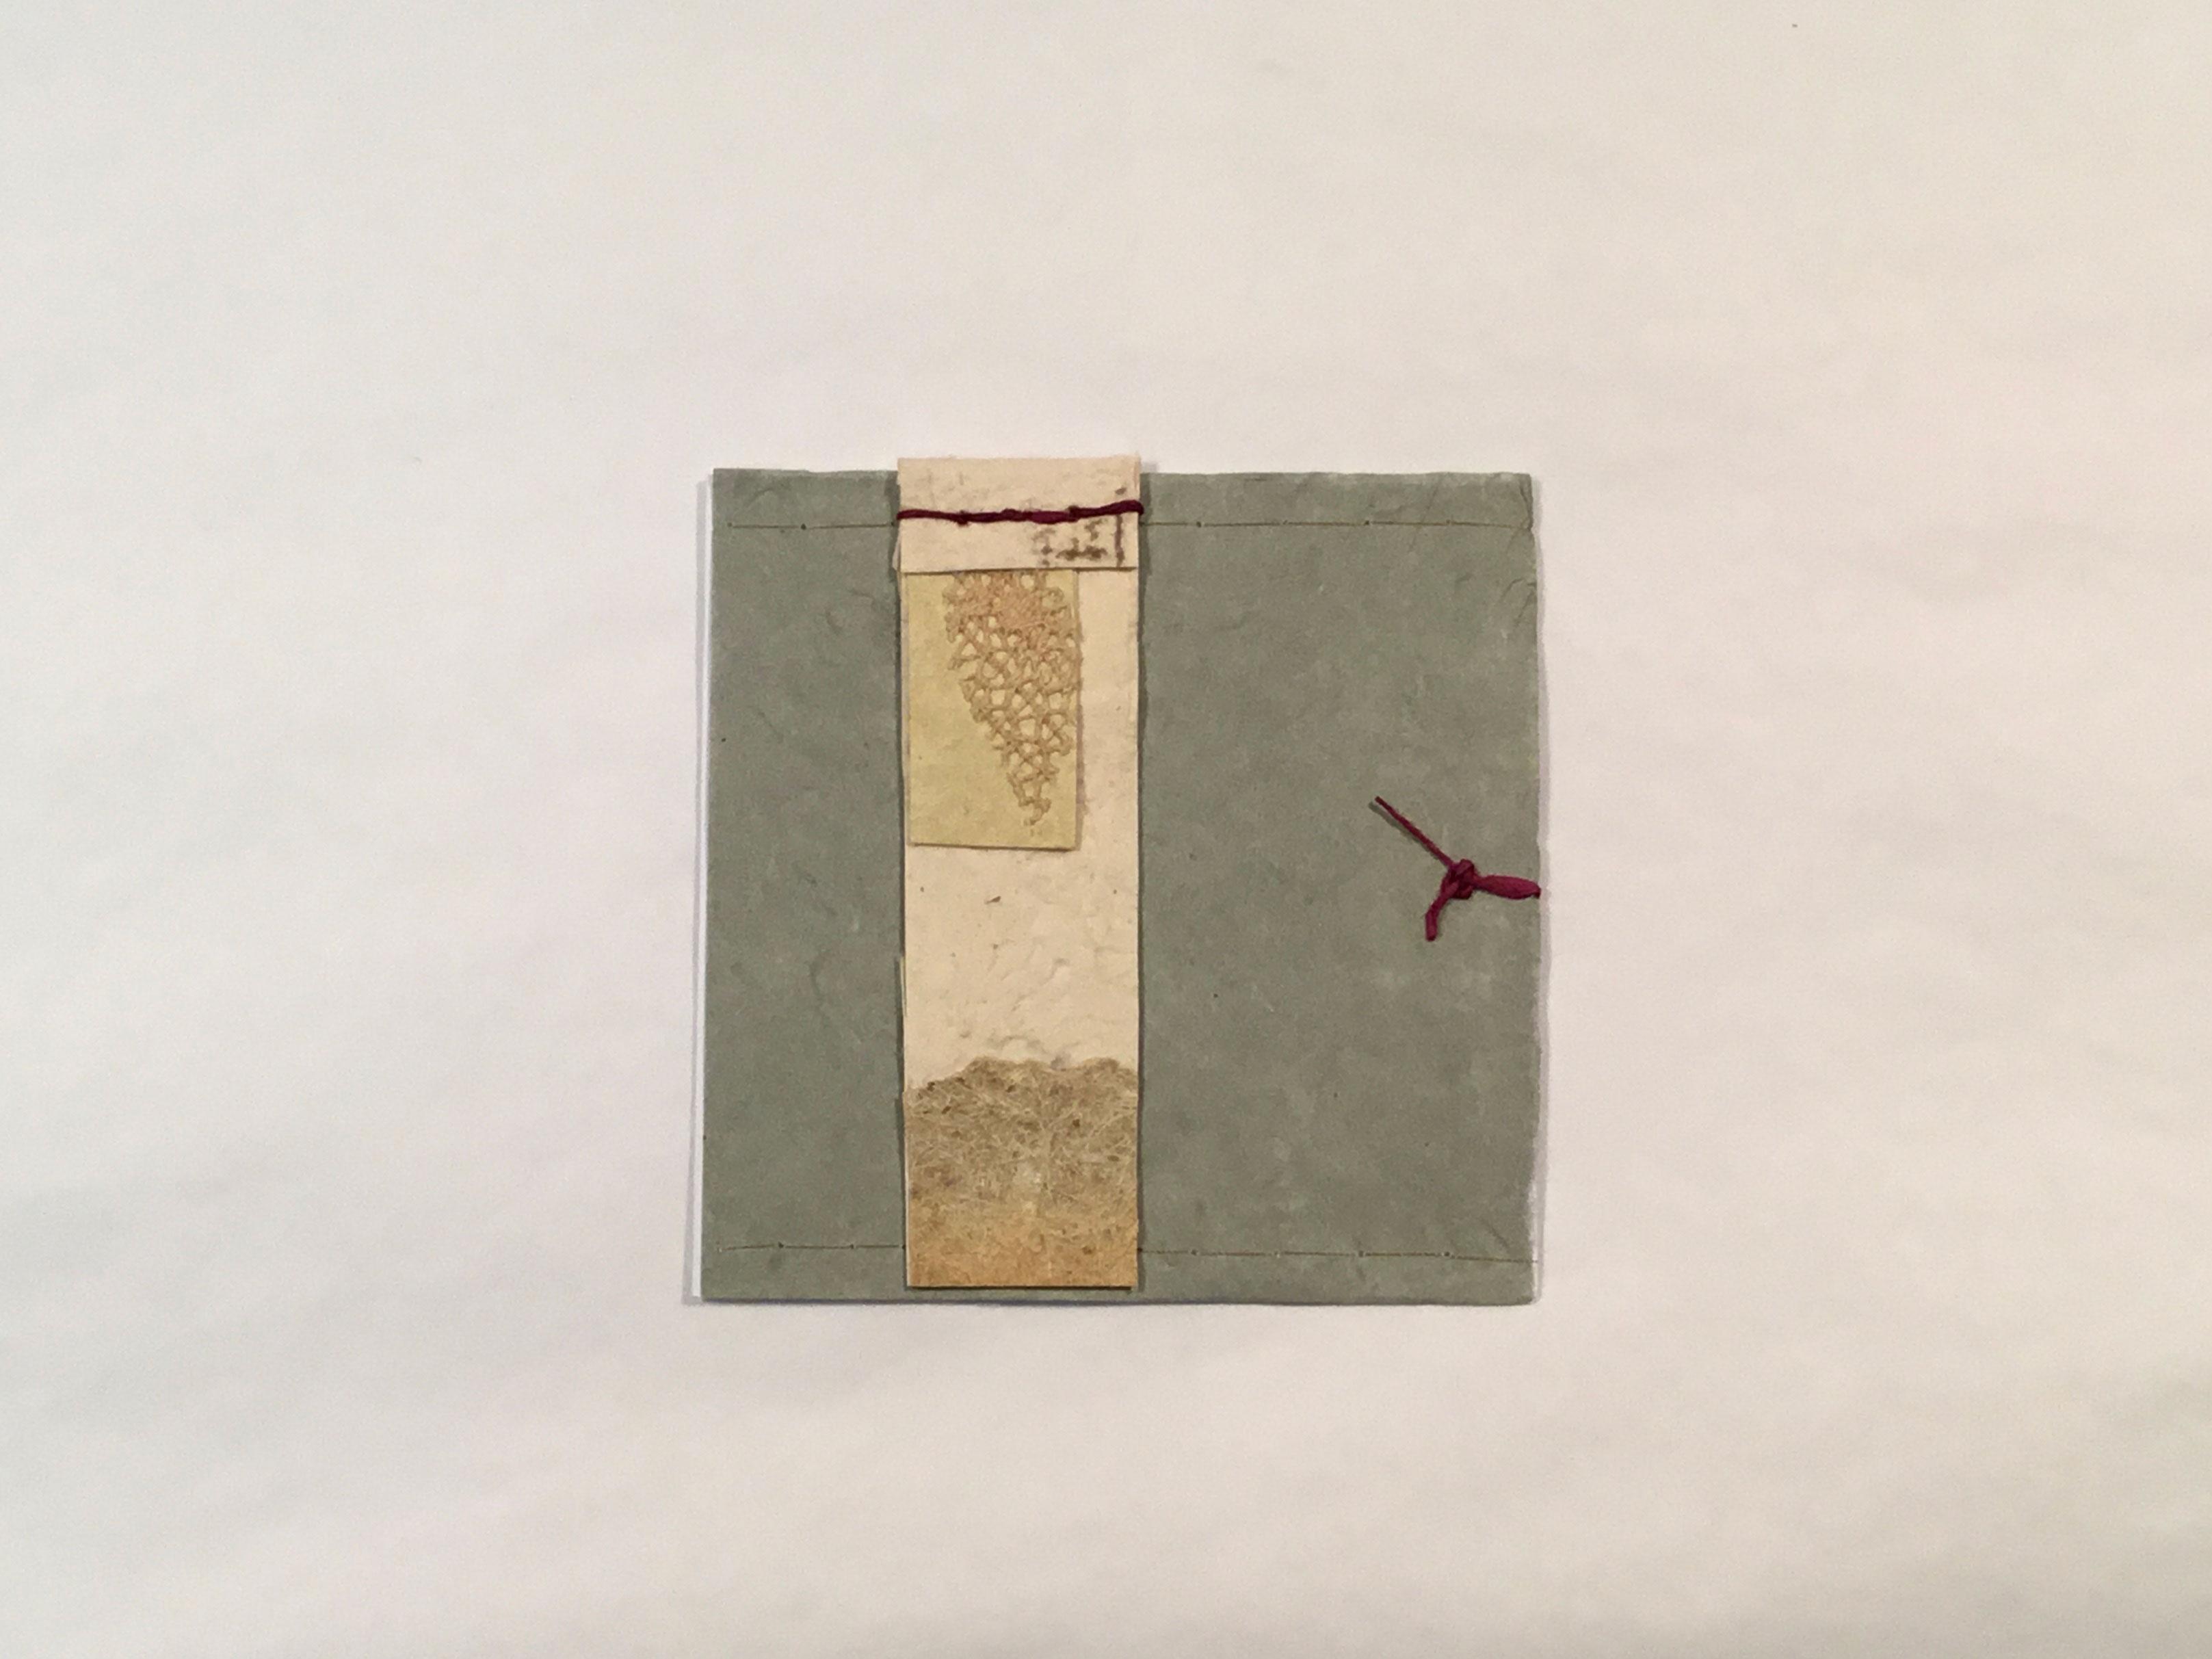 A green-grey square piece of paper with a vertical rectangle of beige paper and various cut-outs layered on top, left of the center. There is a red knot tied on the right of the piece and the beige paper is attached with red stitching.